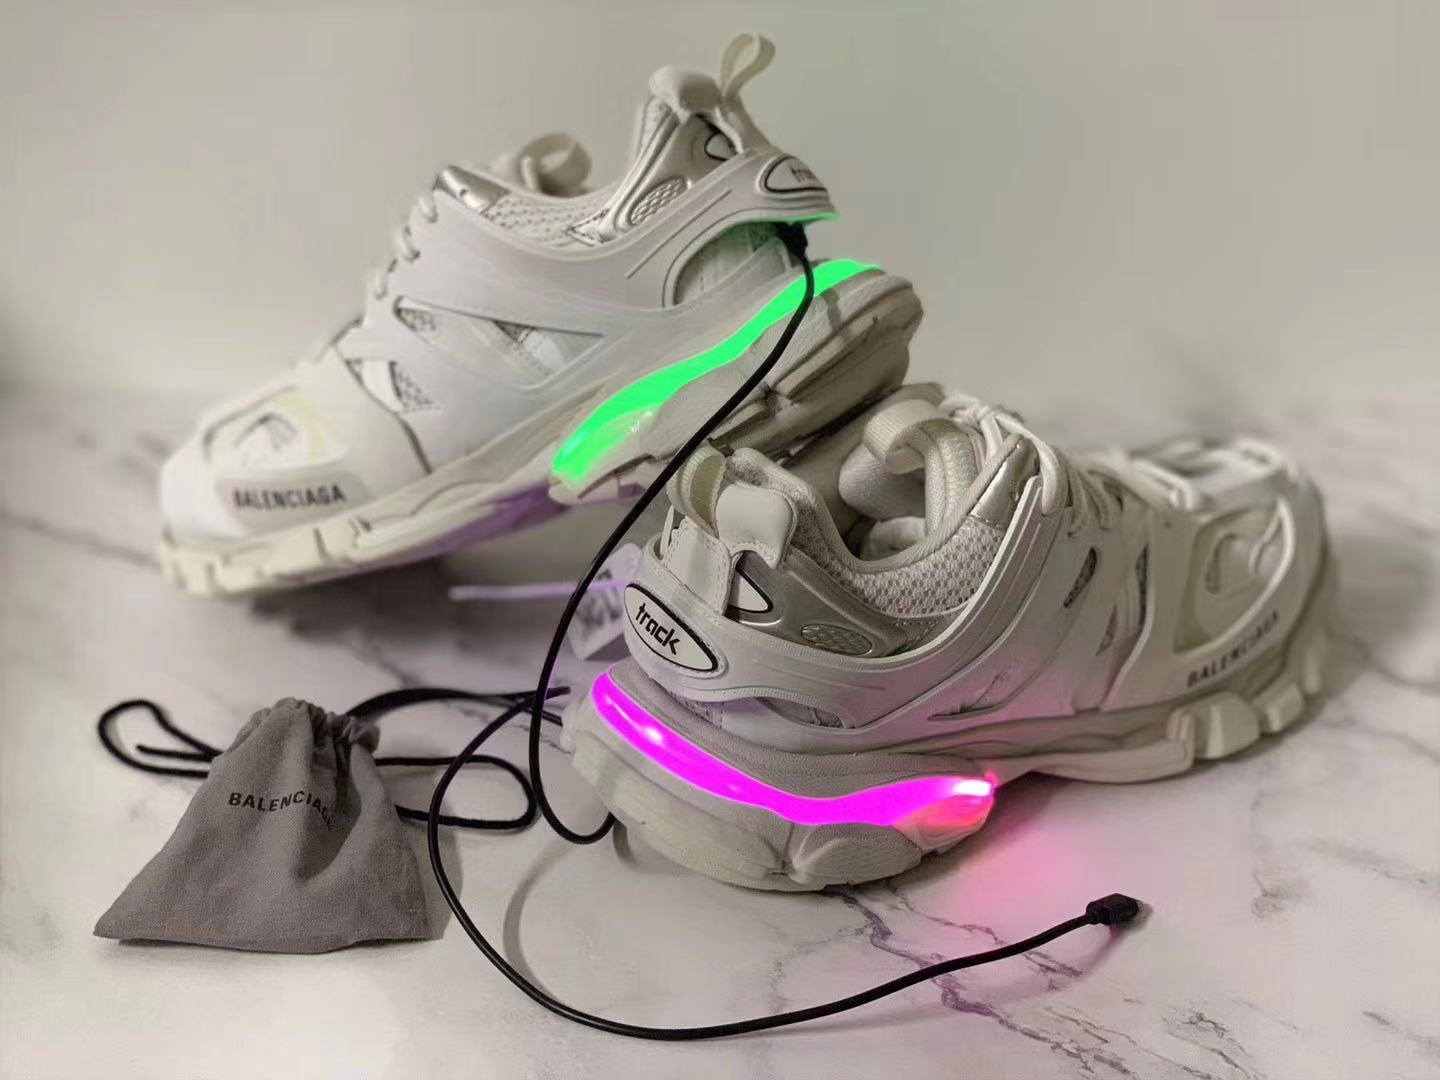 BALENCIAGA 19FW TRACK SNEAKERS 3.0 TRACK LED TRAINERS LIGHTED SOLE